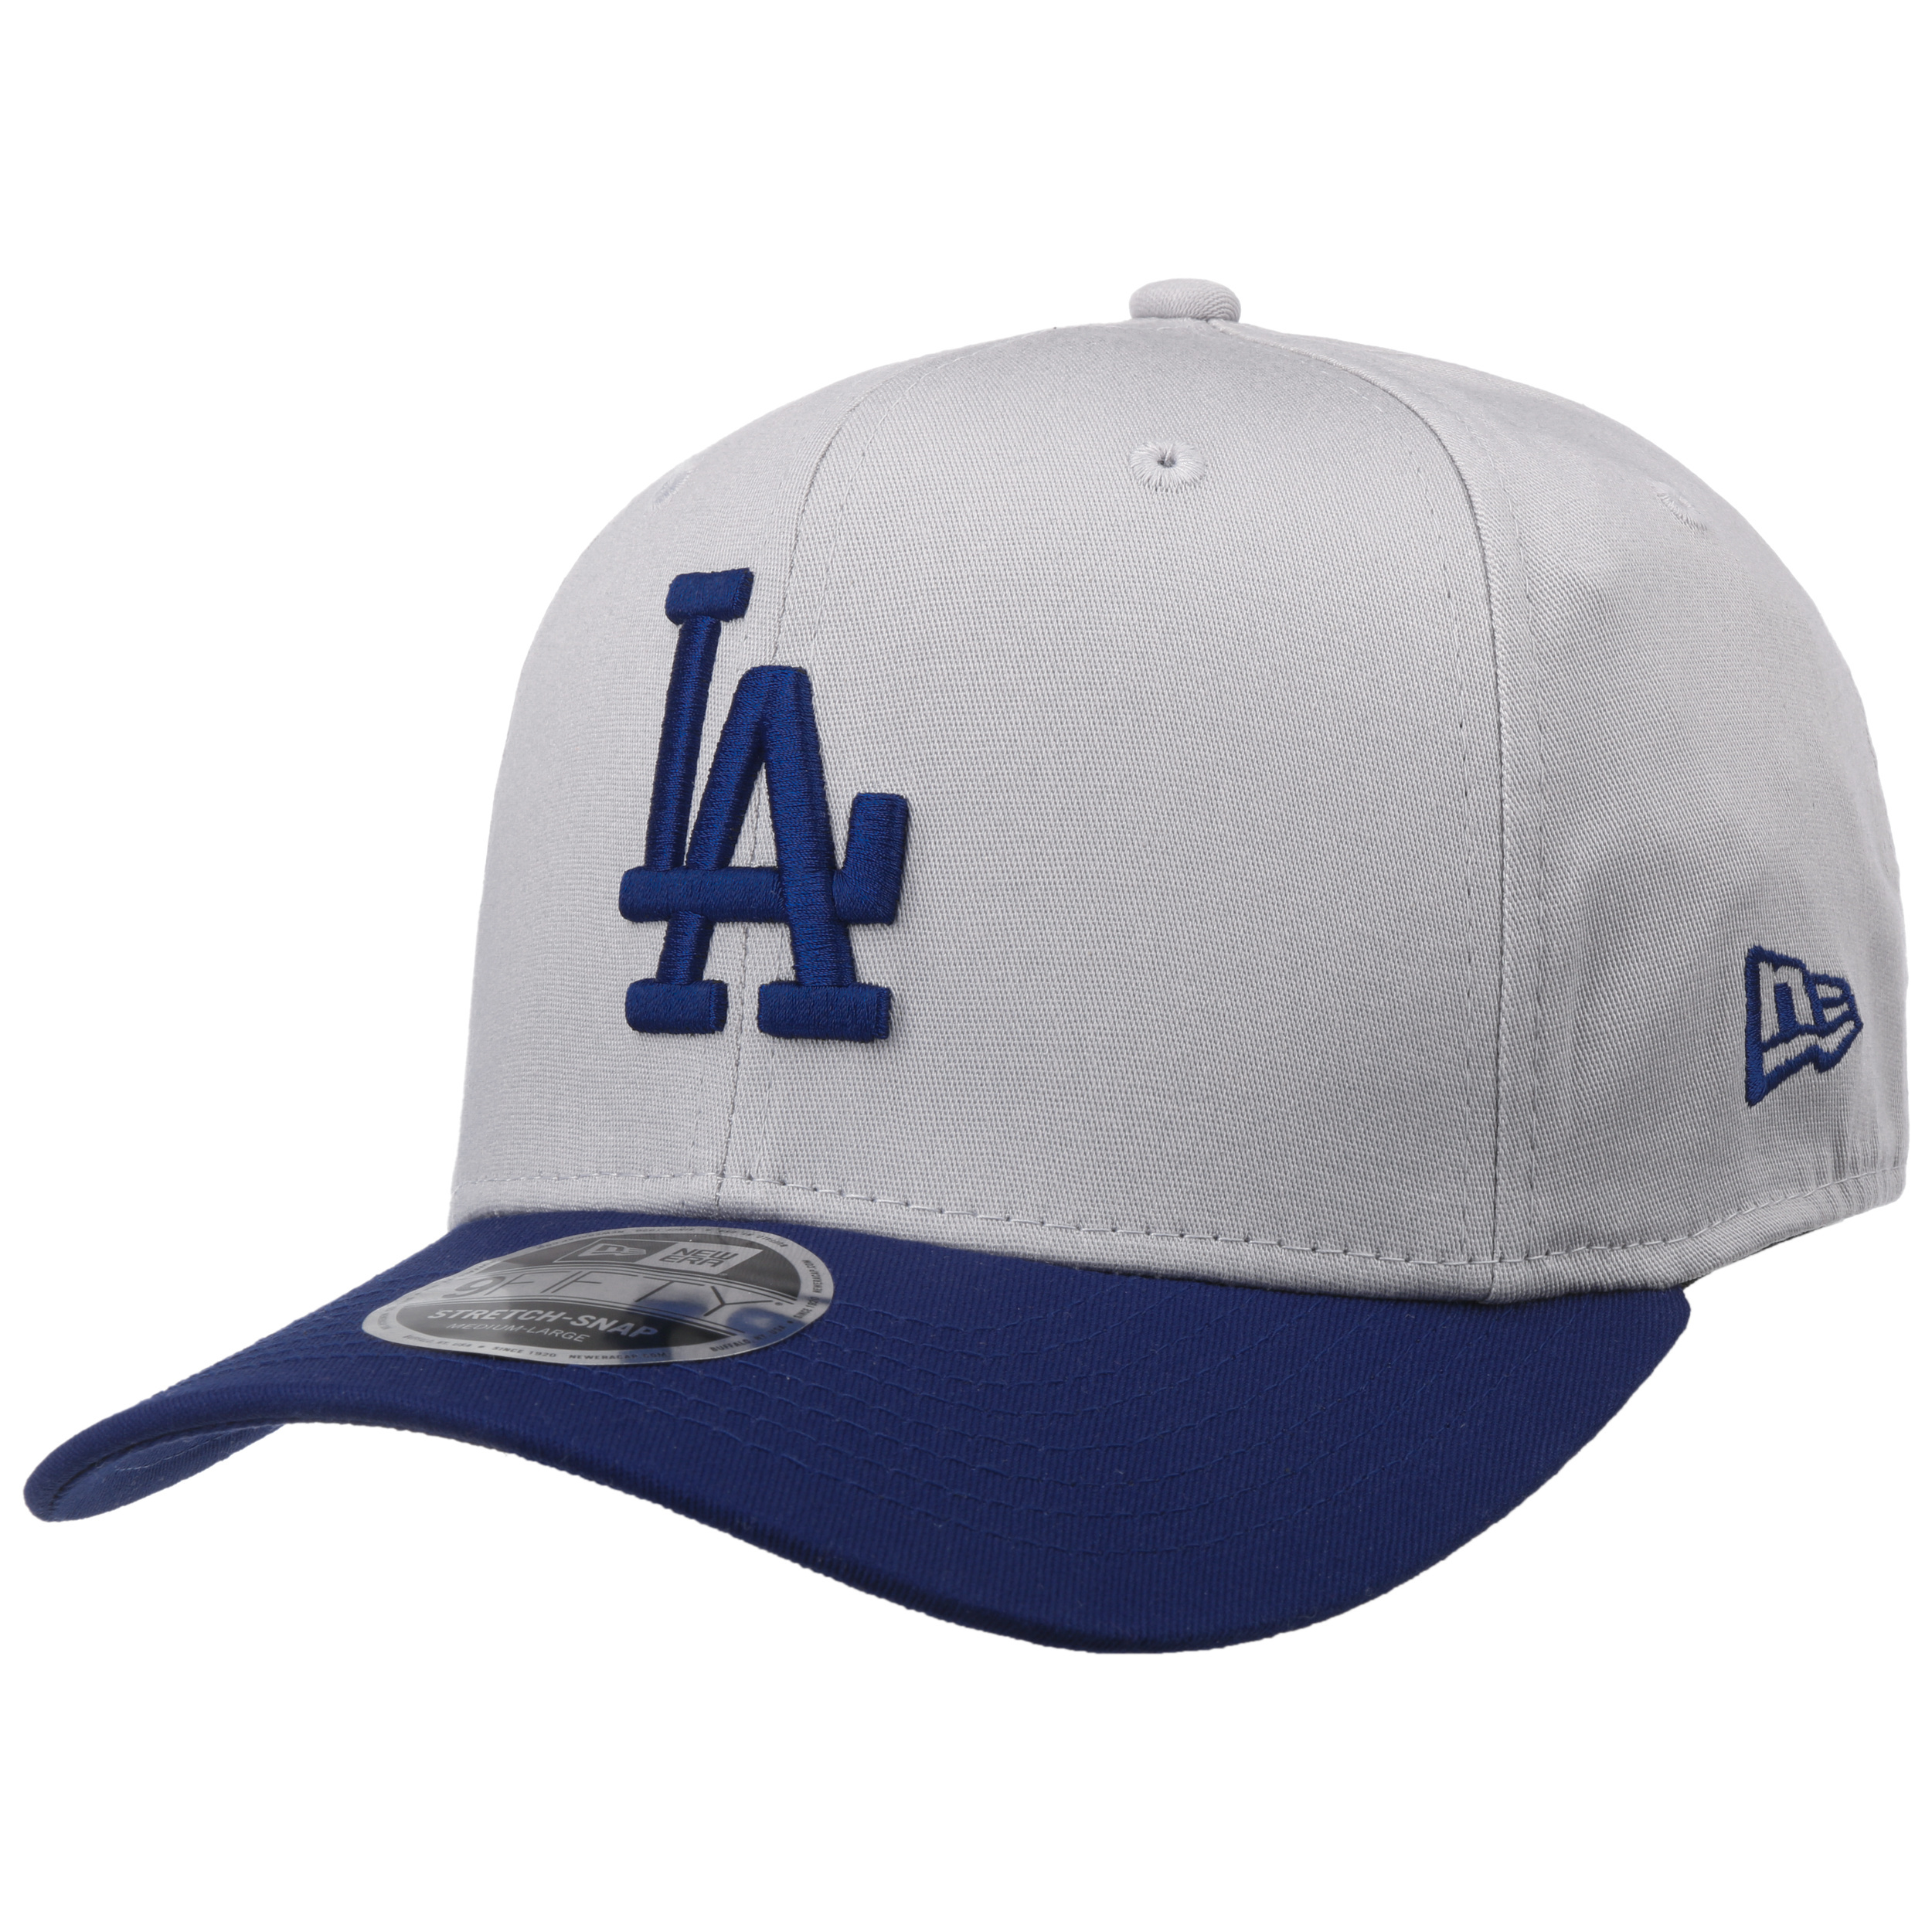 Gorra 9Fifty Angeles Dodgers Snap by New Era 35,95 €